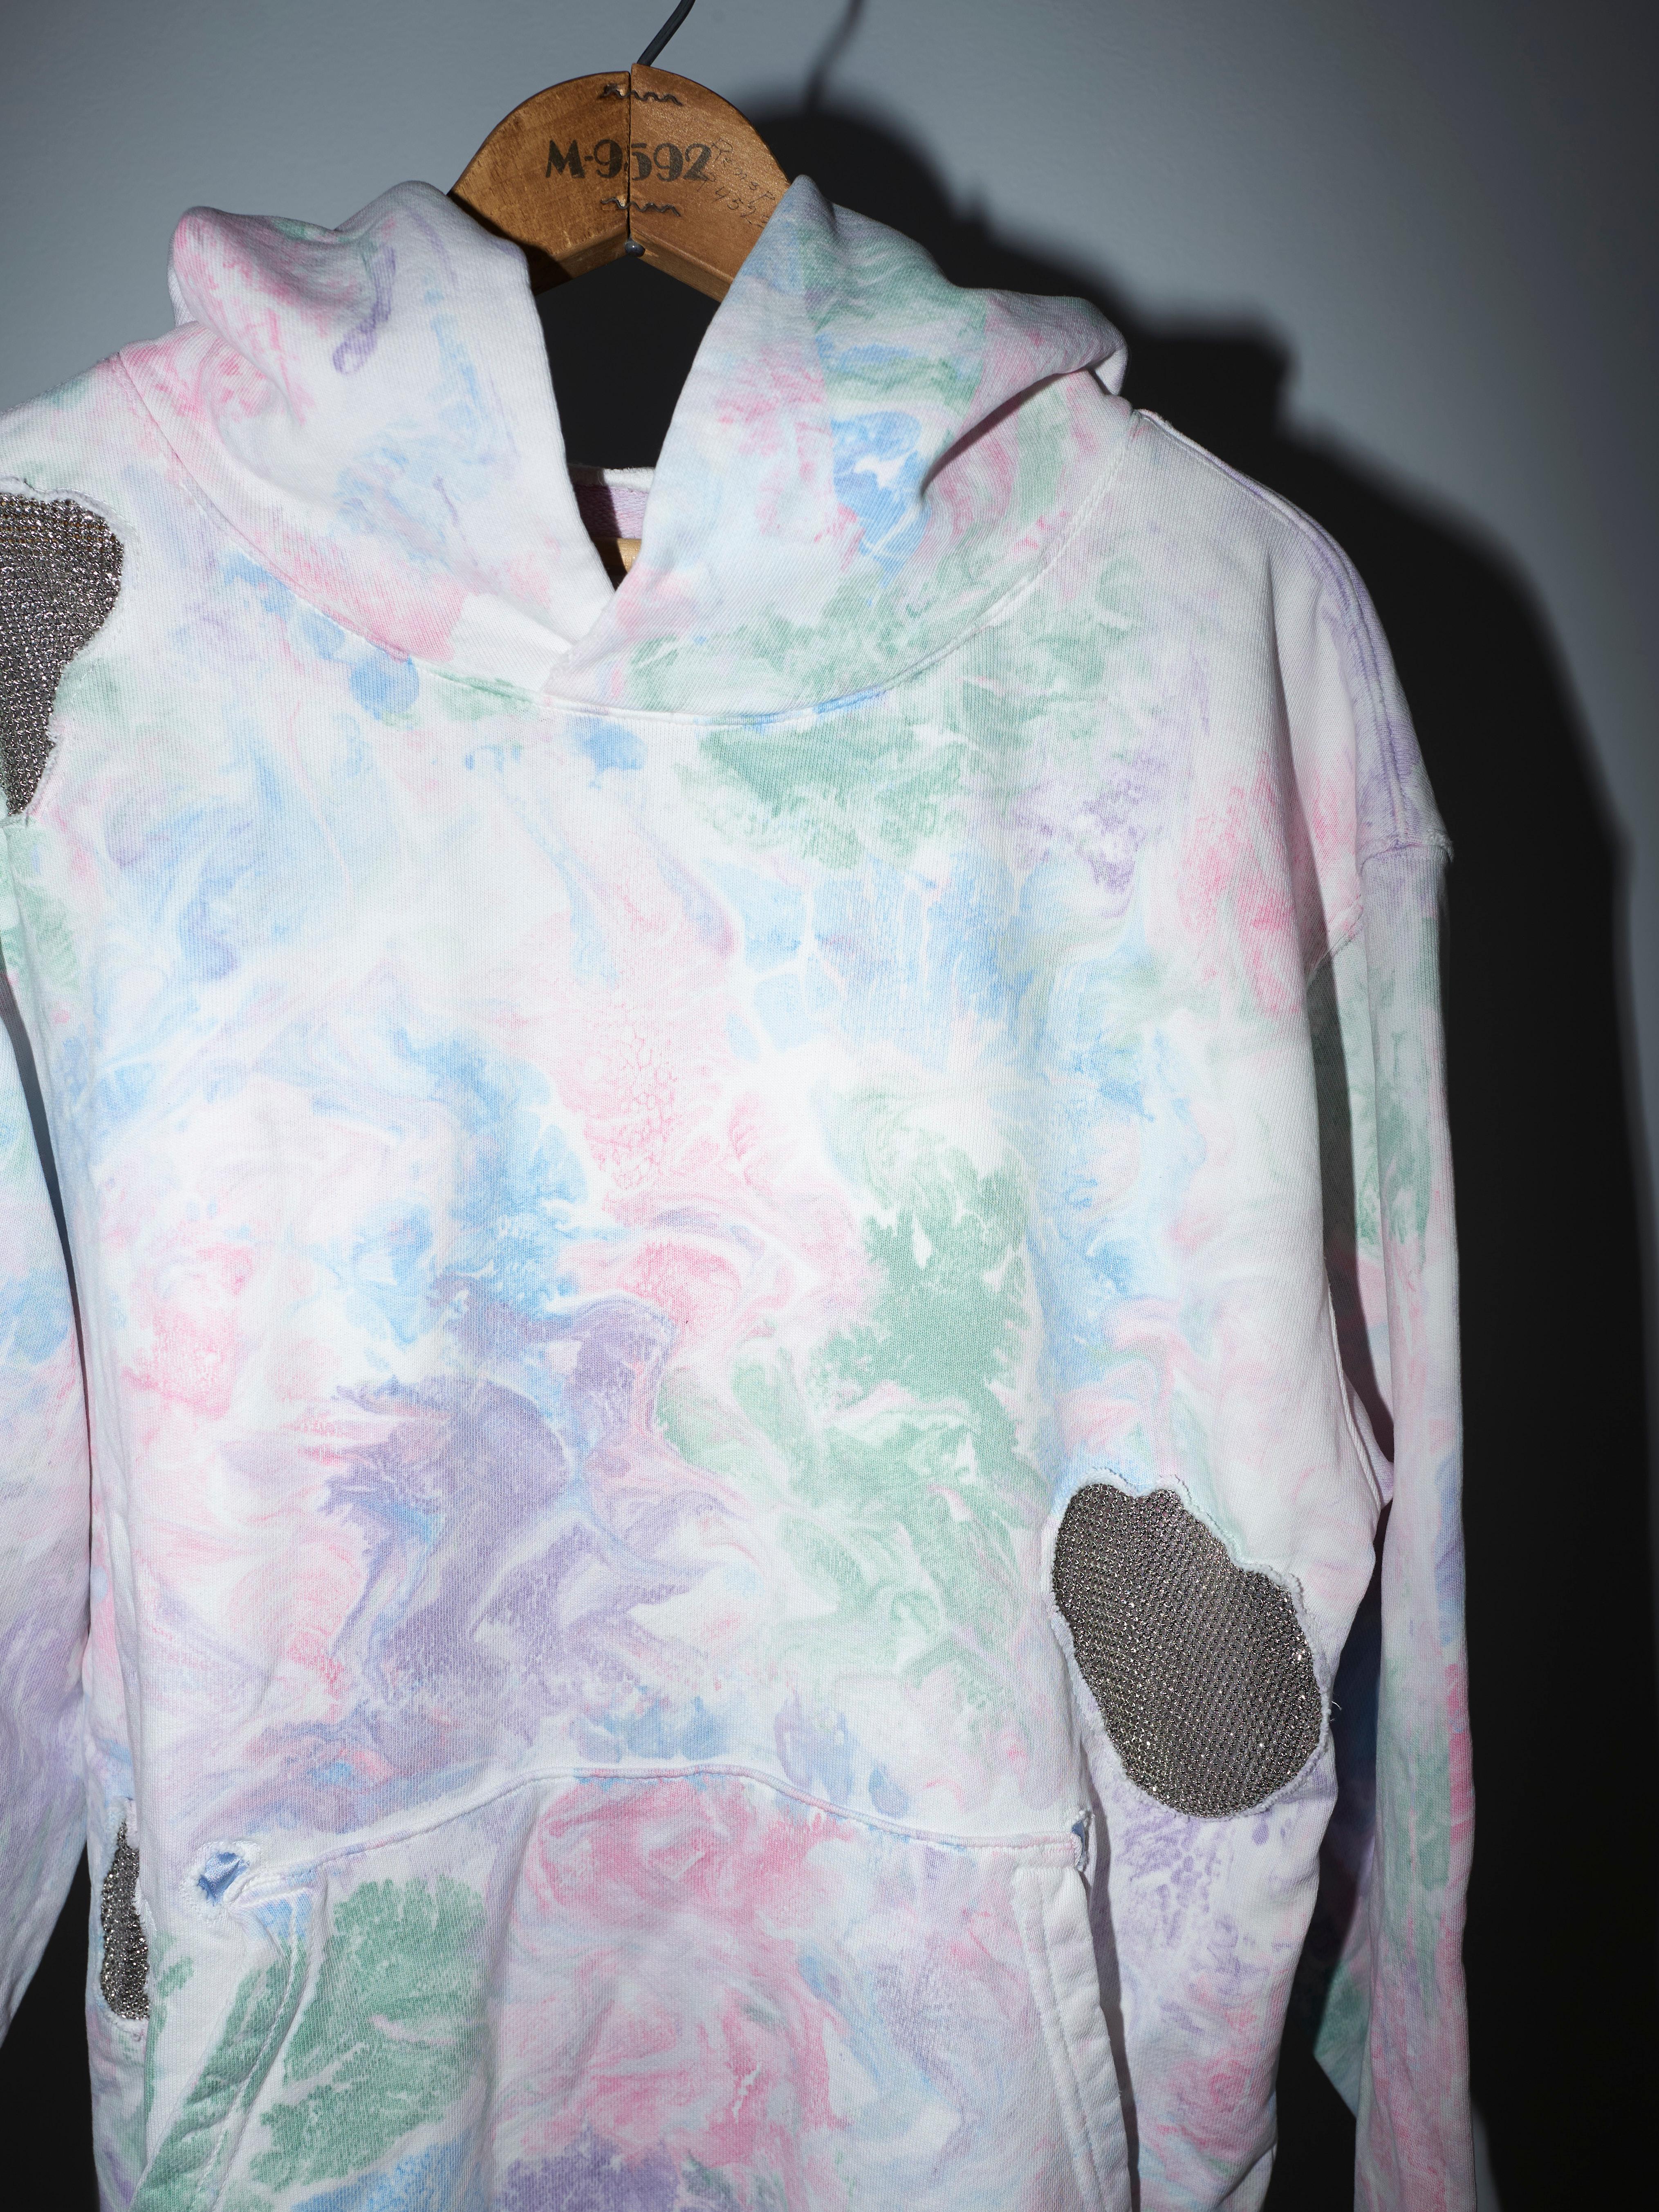 Hoodie Pastel Marble Cotton Embellished Chain Patchwork J Dauphin For Sale 6